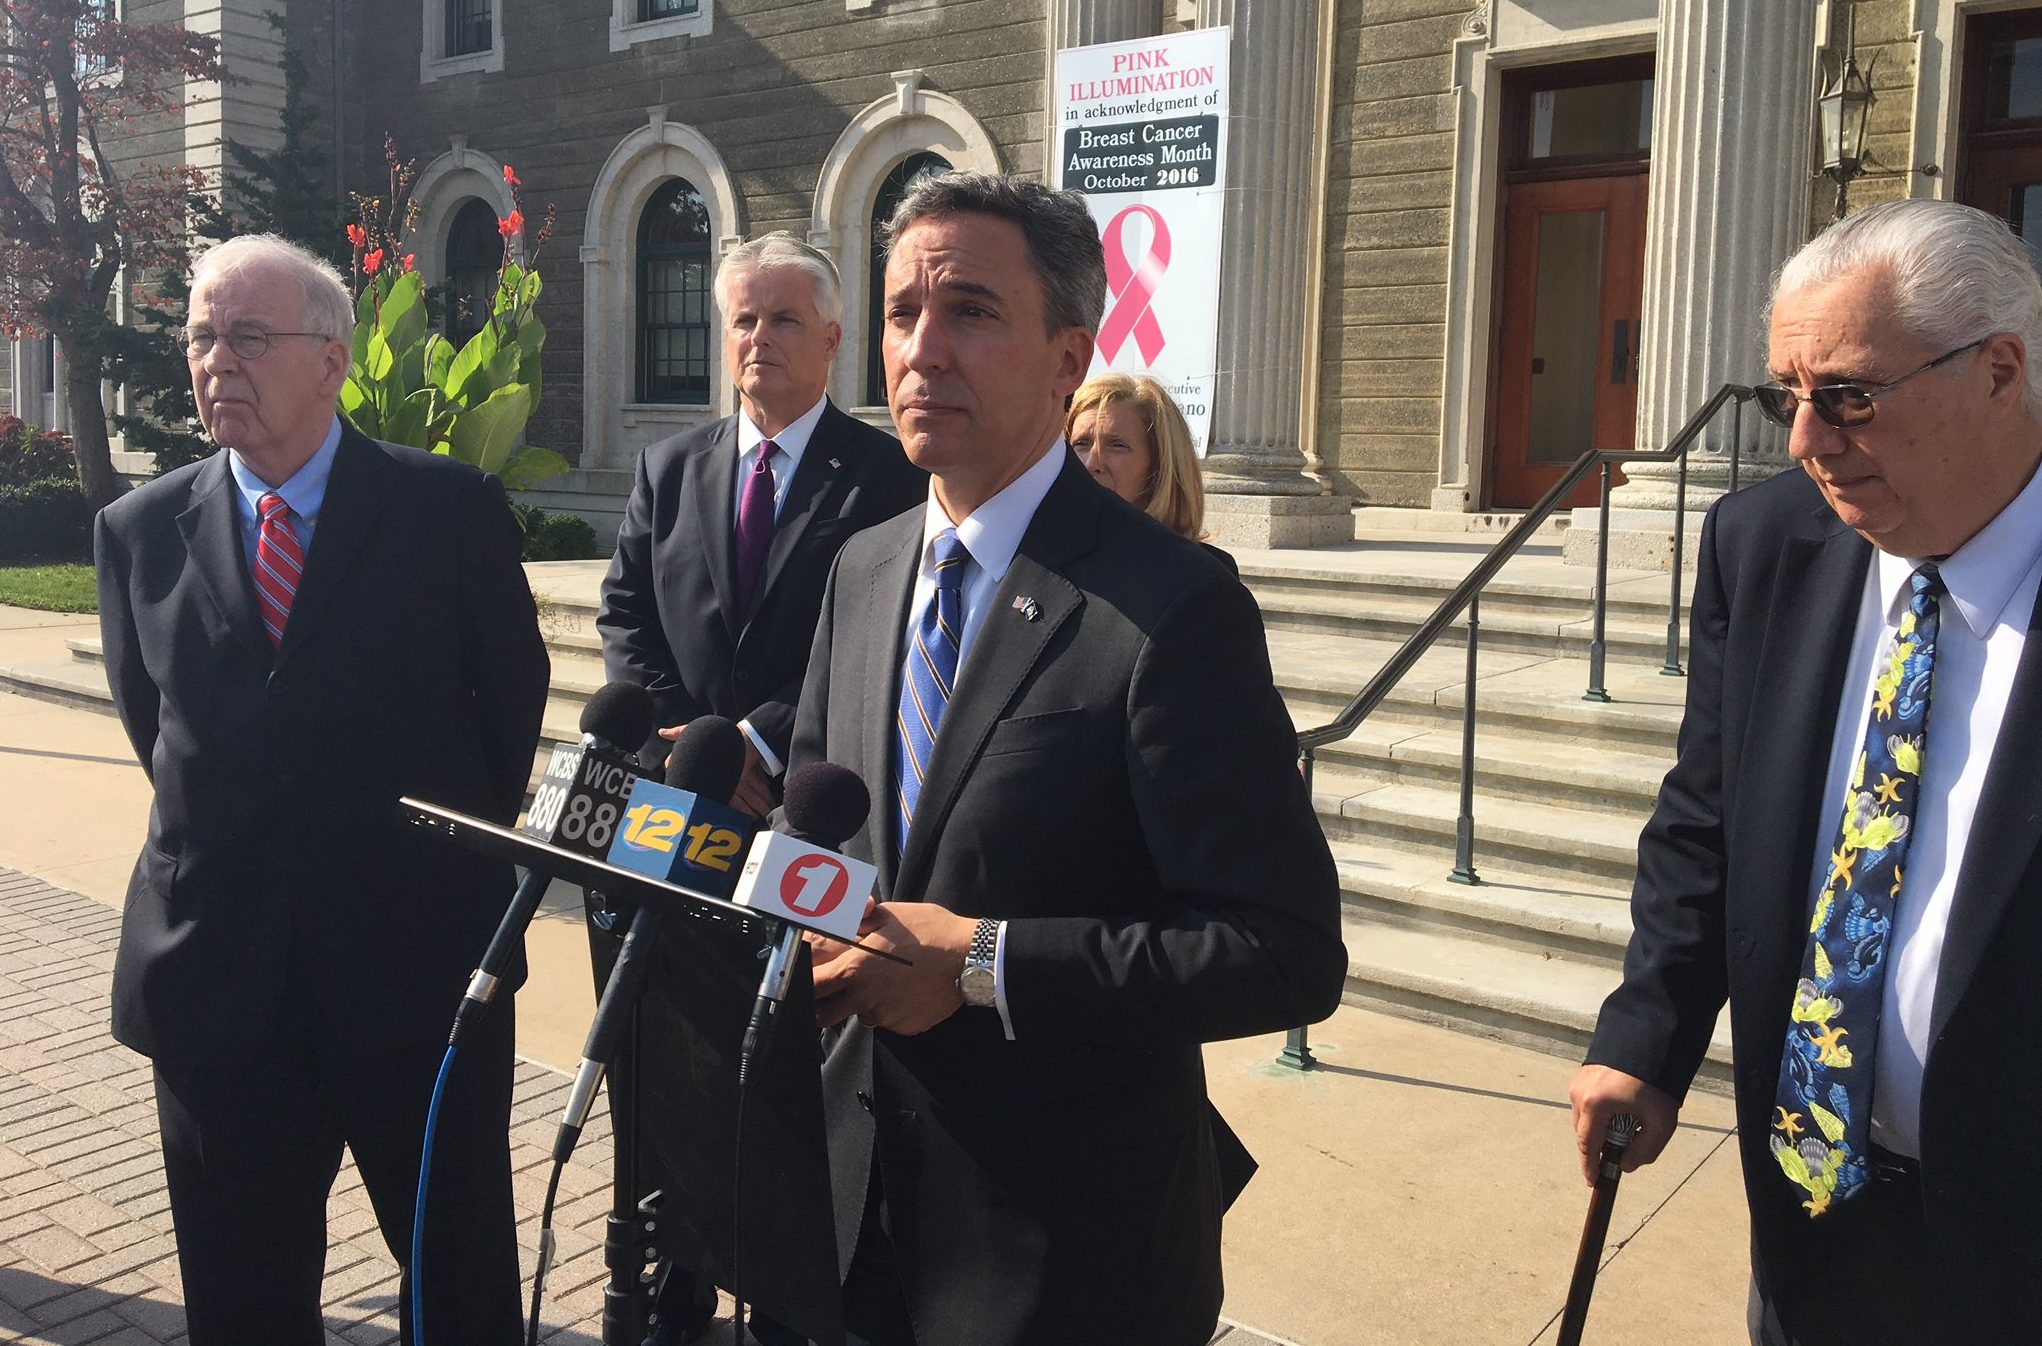 Three State Senators from Nassau County, including Jack Martins, who is running for Congress, called on Nassau County Executive Ed Mangano and Town of Oyster Bay Supervisor John Venditto to resign following corruption allegations. (Rashed Mian/Long Island Press) 